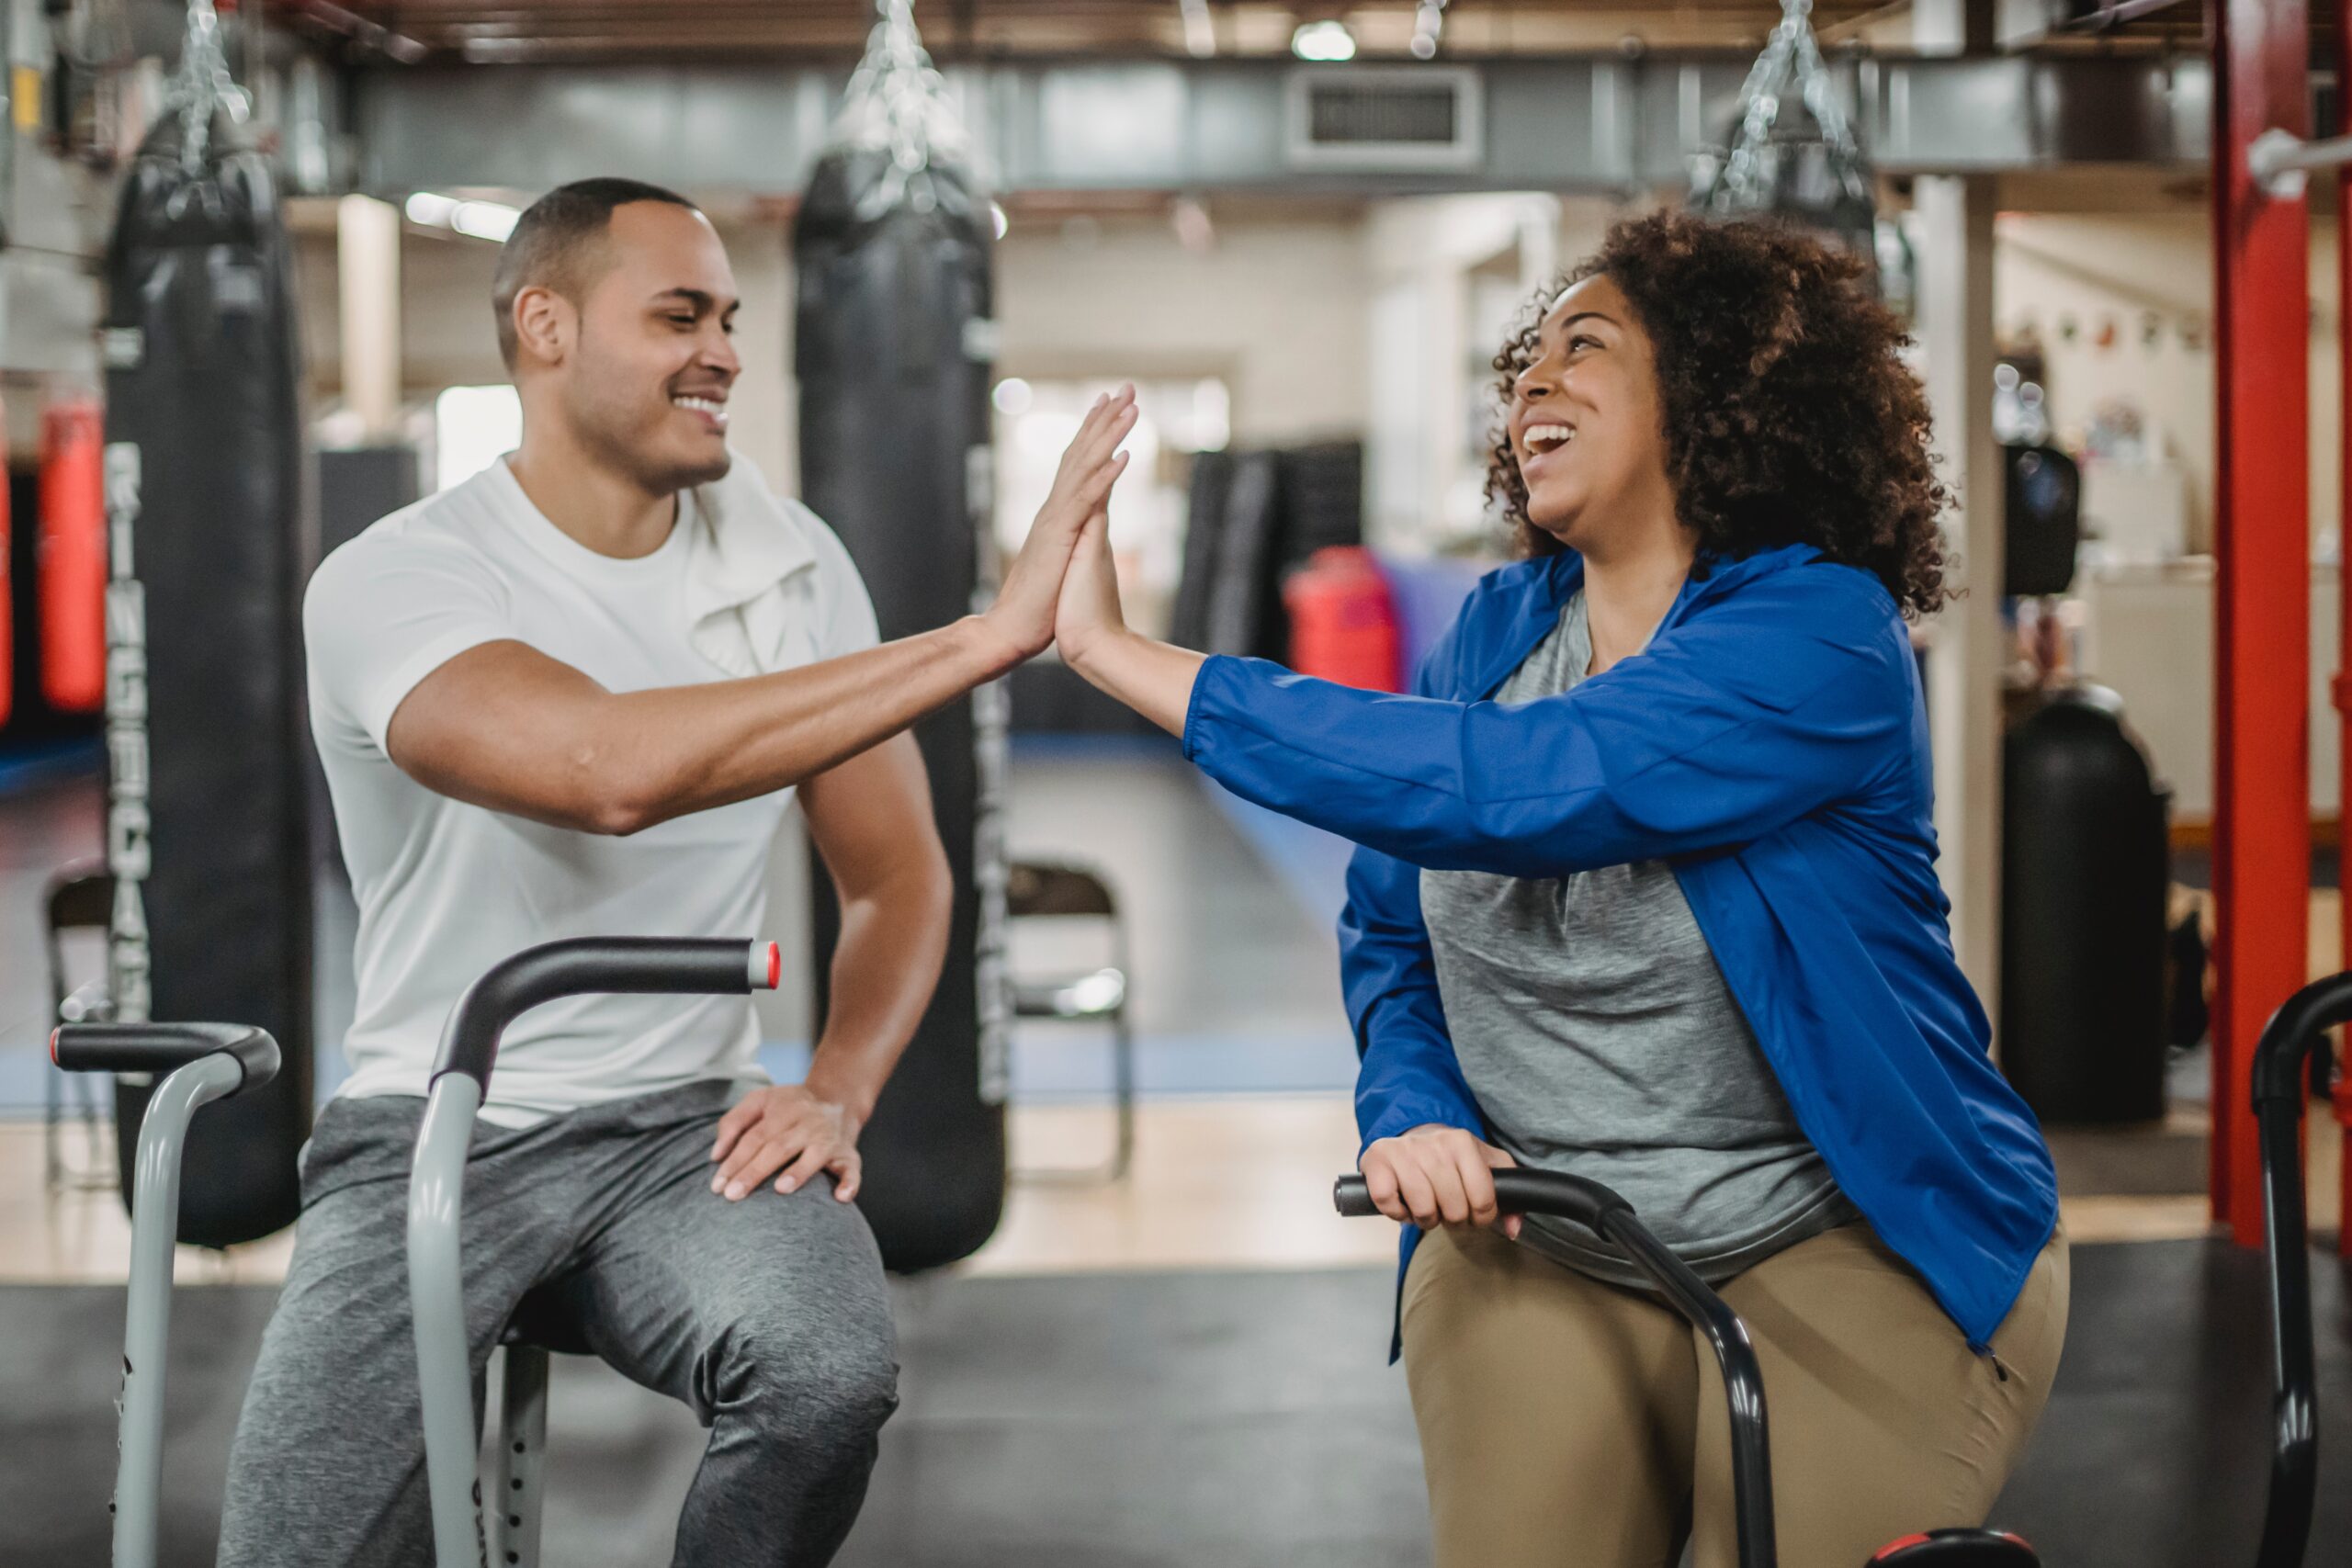 A man and a woman smiling and giving each other a high-five in a gym, with the woman sitting on an exercise bike and the man standing beside her.